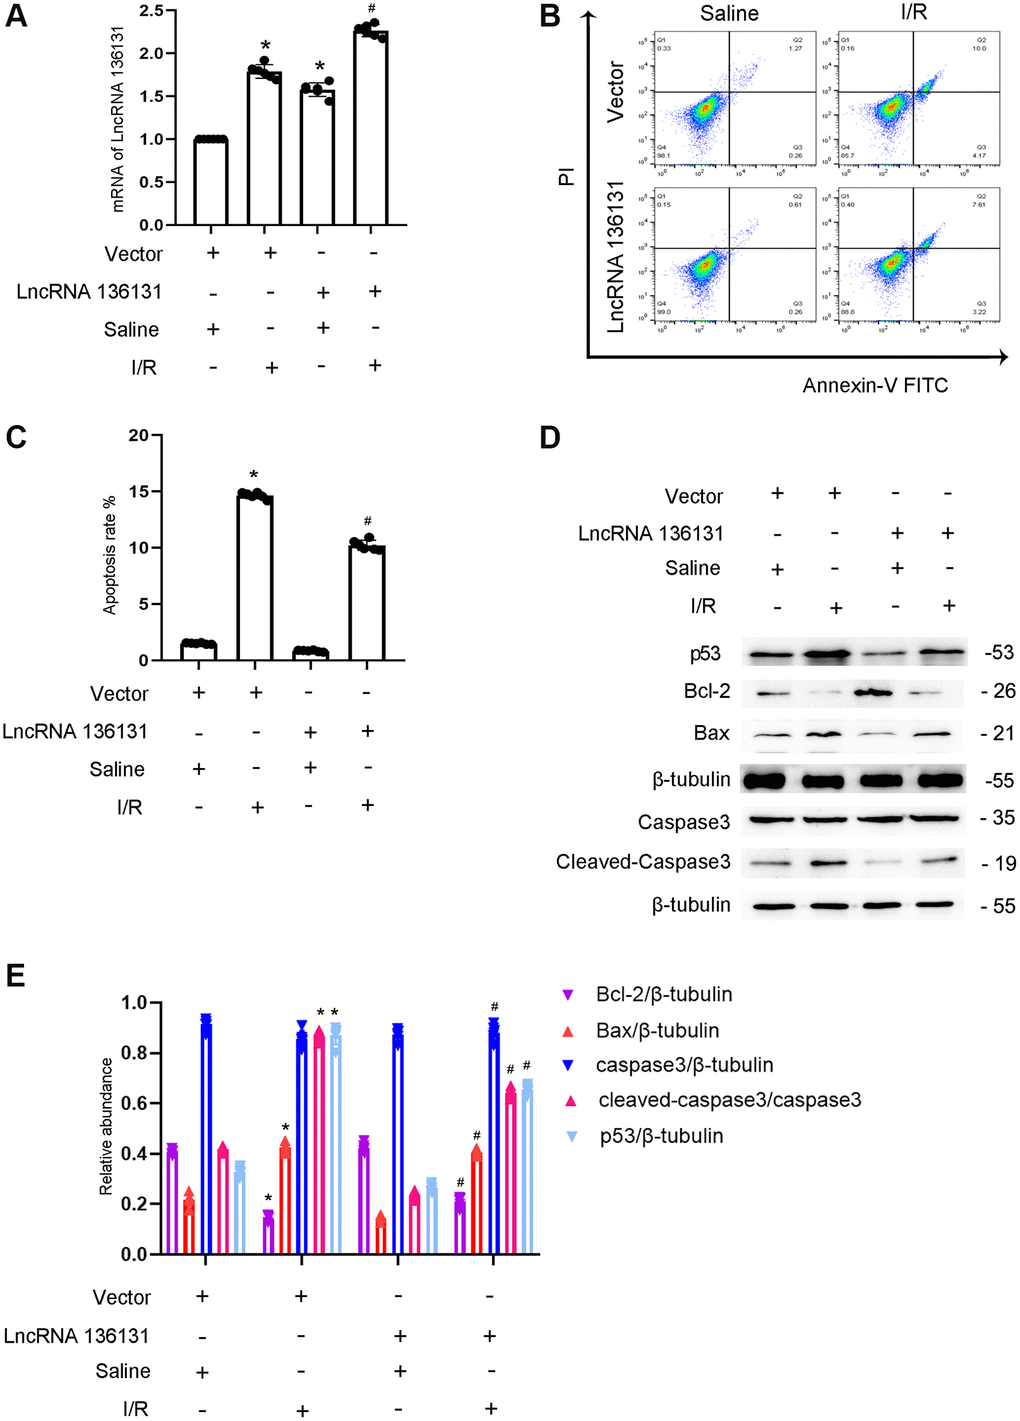 Overexpression of lncRNA136131 attenuates I/R-induced BUMPT cells apoptosis and the expression of cleaved-caspase3. BUMPT cells were transfected with lncRNA136131 plasmid or control and then treated with or without I(2 hours)/R(2 hours) injury. (A) RT-qPCR analysis of the expression of lncRNA136131. (B) FCM analysis of BUMPT cells apoptosis. (C) Analysis of apoptosis rate (%). (D) The immunoblot analysis of caspase 3, cleaved-caspase3, Bax, p53 and Blc-2. (E) The gray analysis between them. Data are expressed as mean ± SD (n = 6). *p #p 